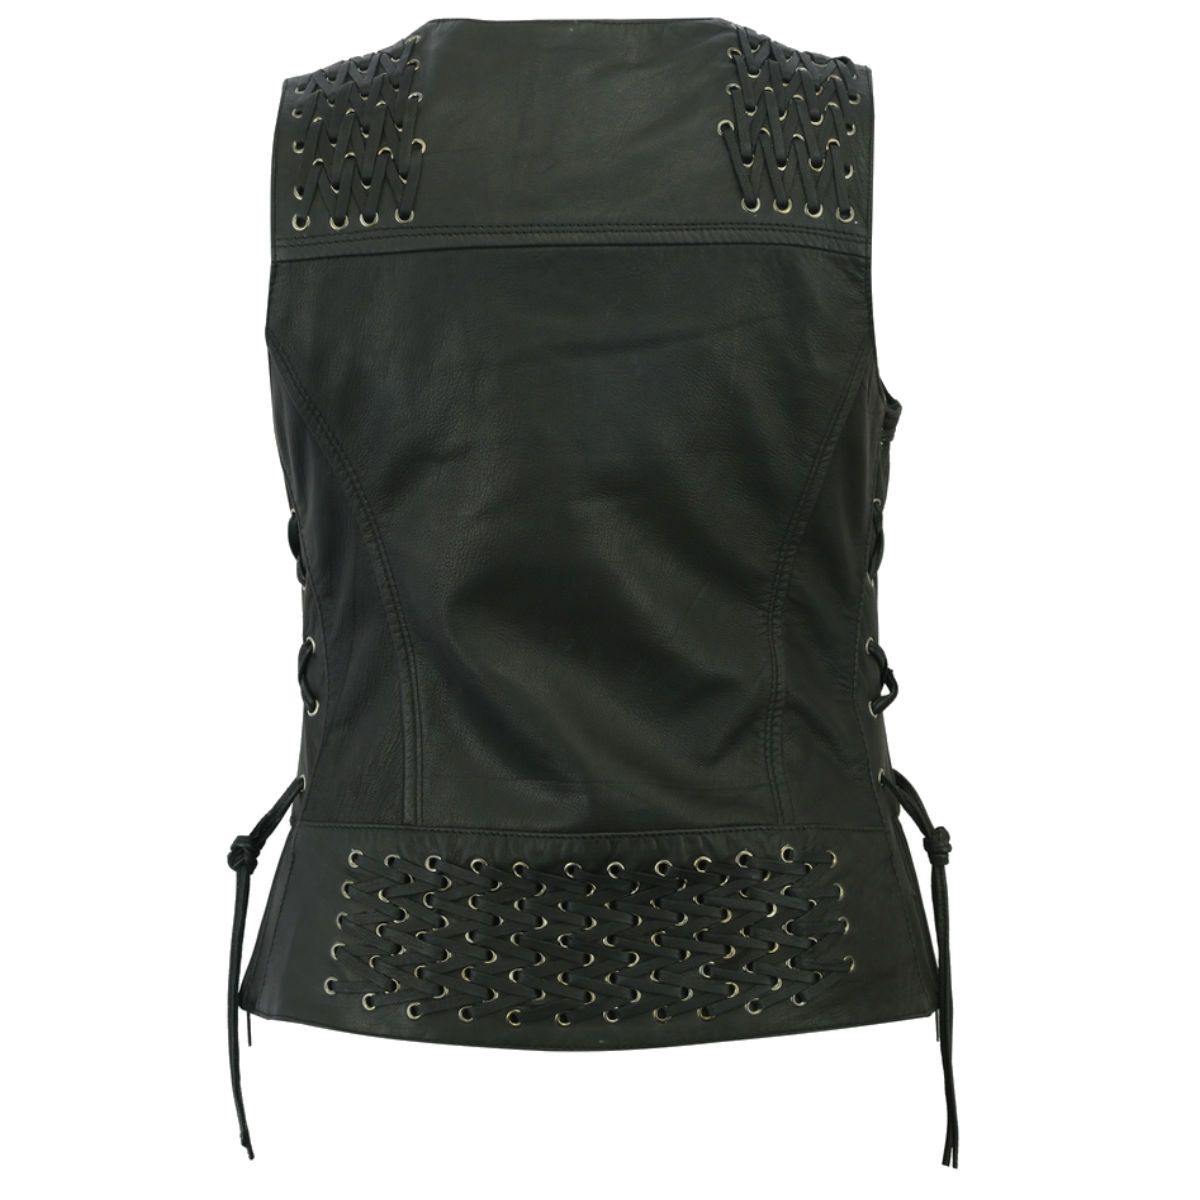 Daniel Smart Black Vest with Grommet and Lacing Accents - American Legend Rider